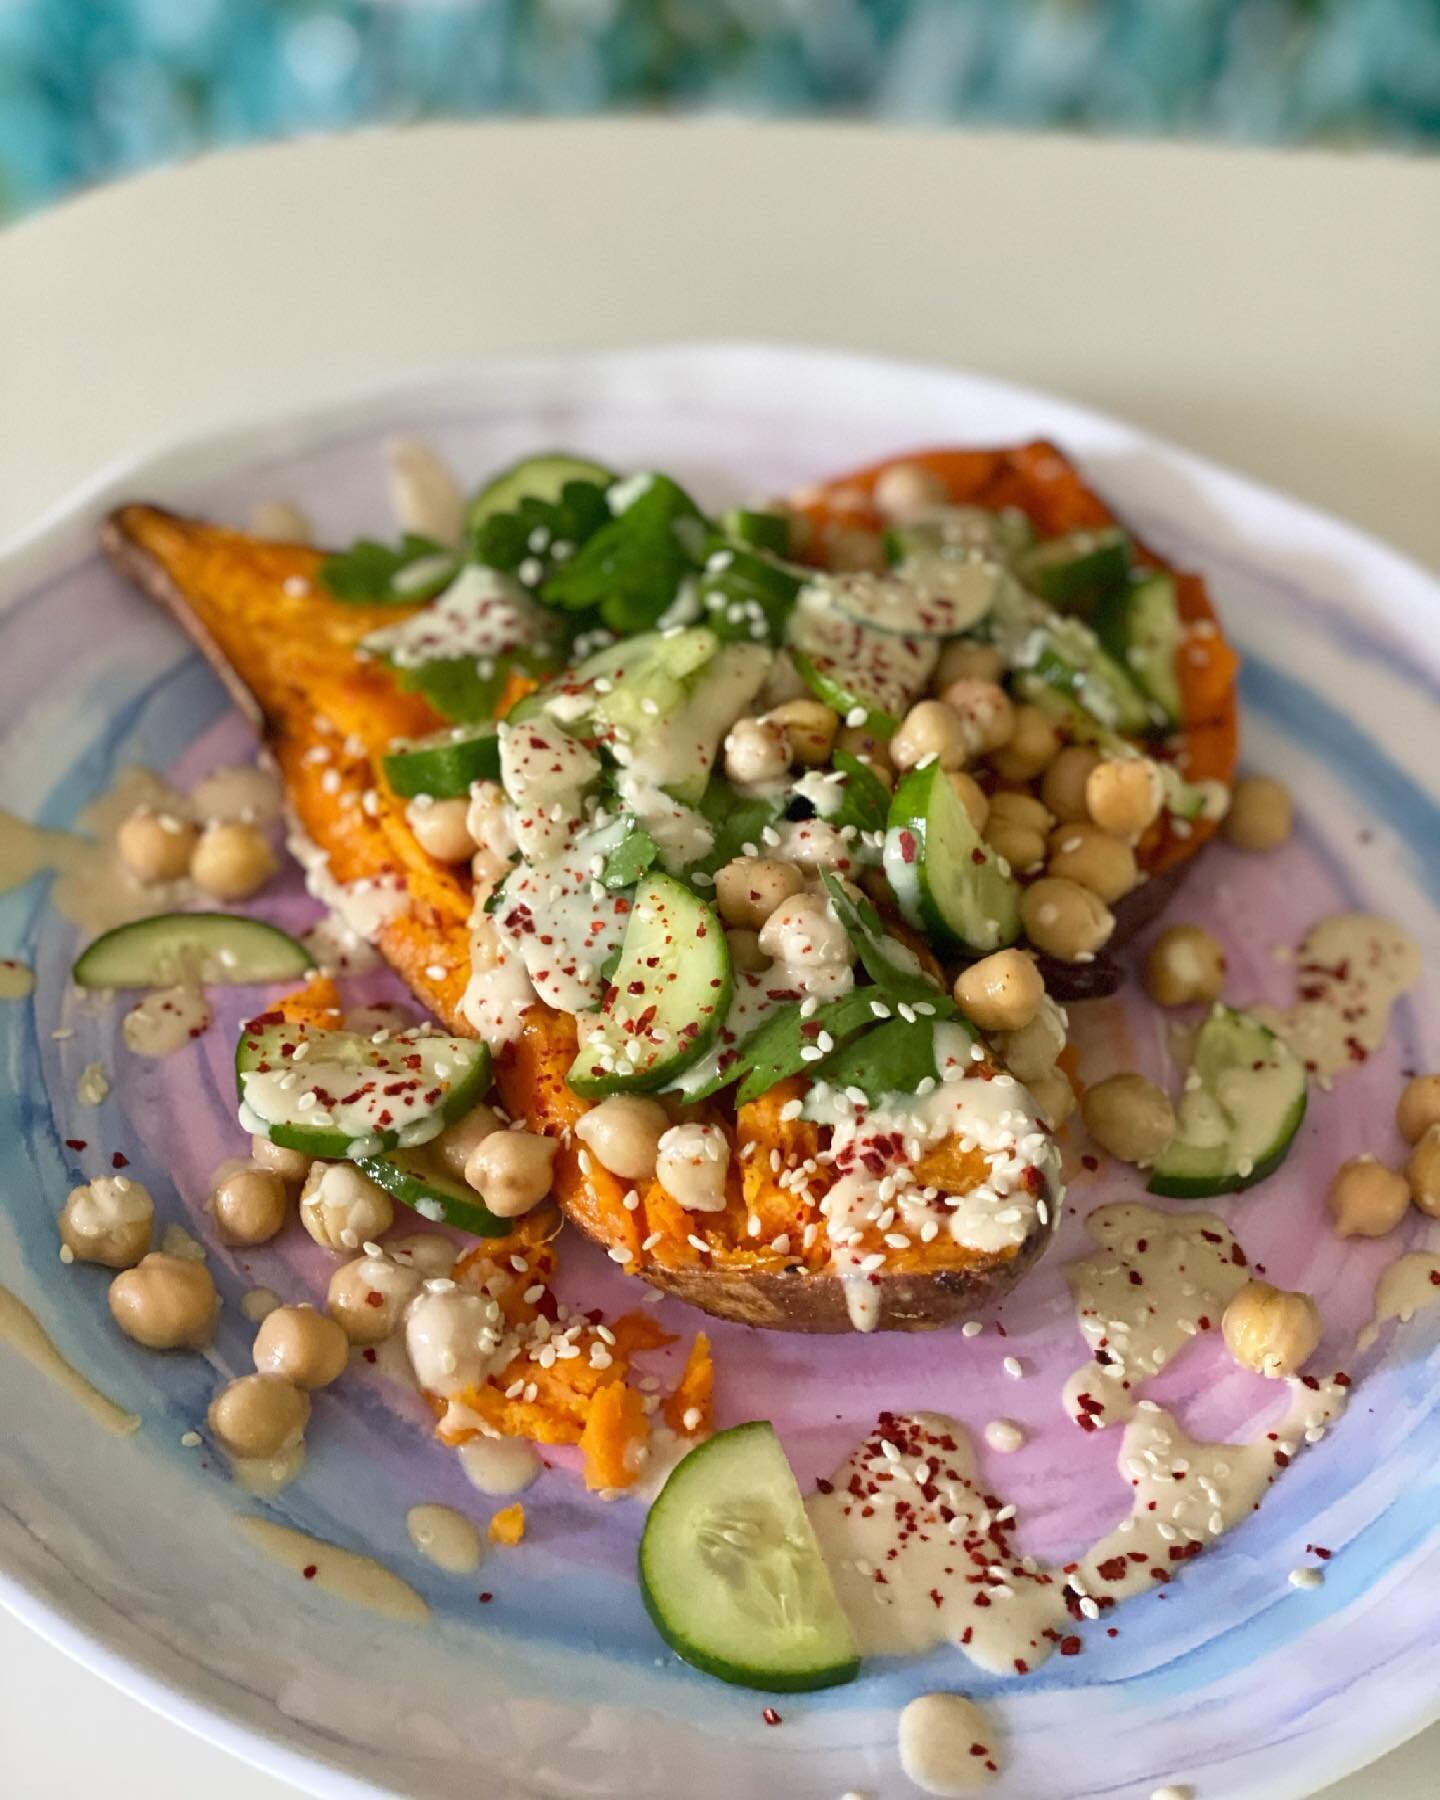 There&rsquo;s a little extra spring in my step &amp; on my plate these days 🌱

Loved this Stuffed Sweet Potato
with Cucumber Chickpea Salad &amp; Miso Tahini recipe from @purplecarrotxo 💜

What do you enjoy most about the longer days &amp; warmer w